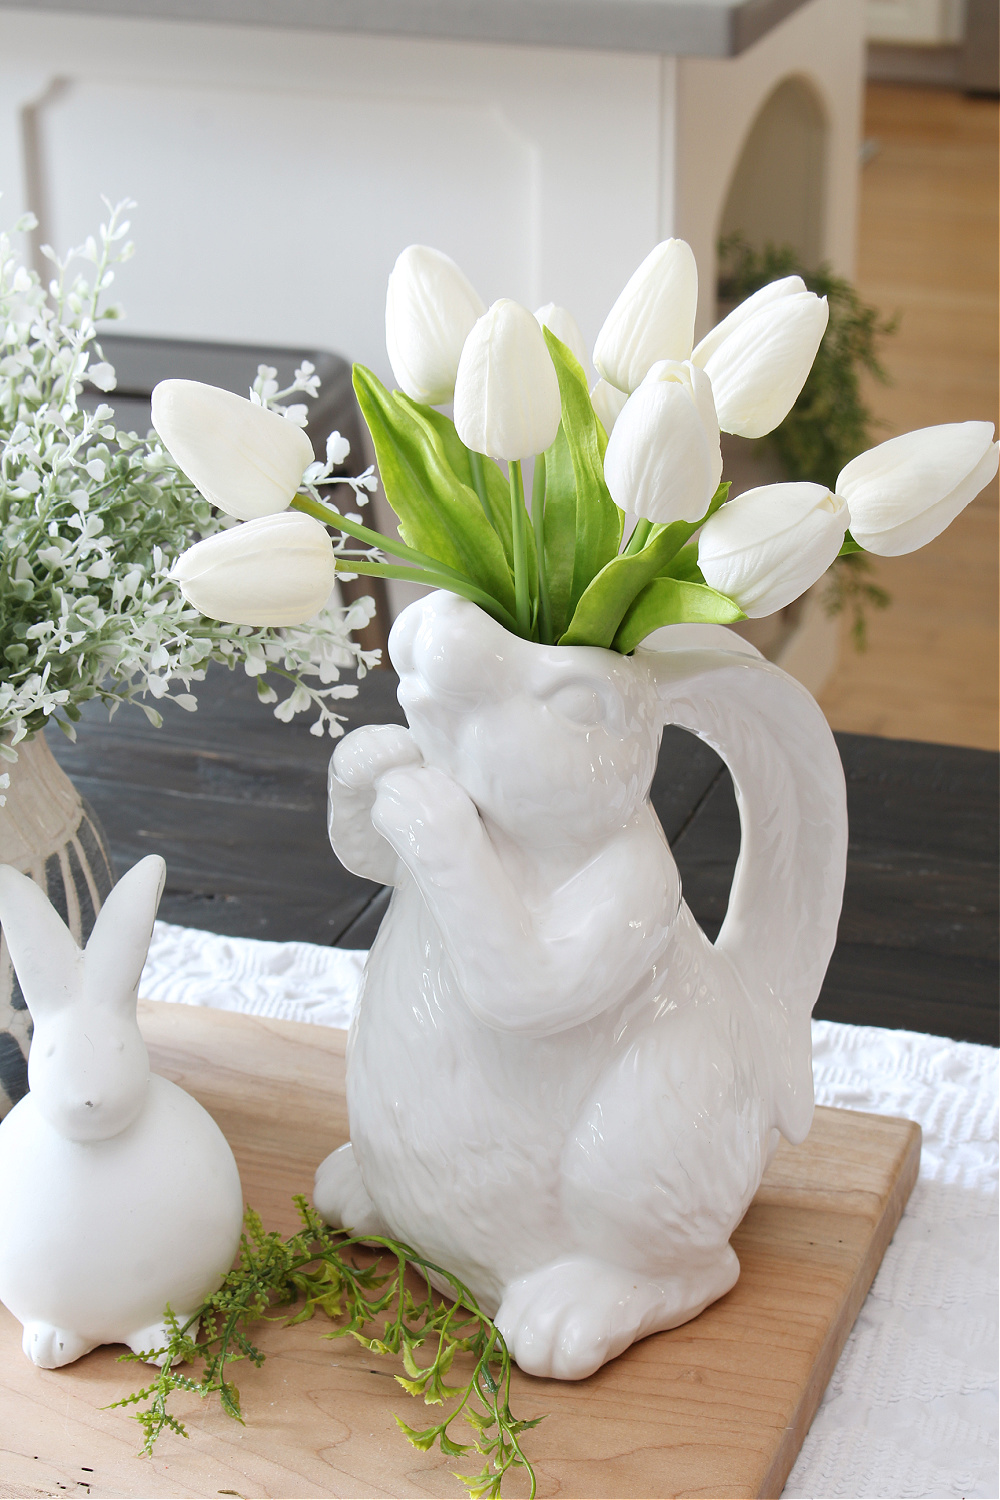 Bunny vase with faux tulips.